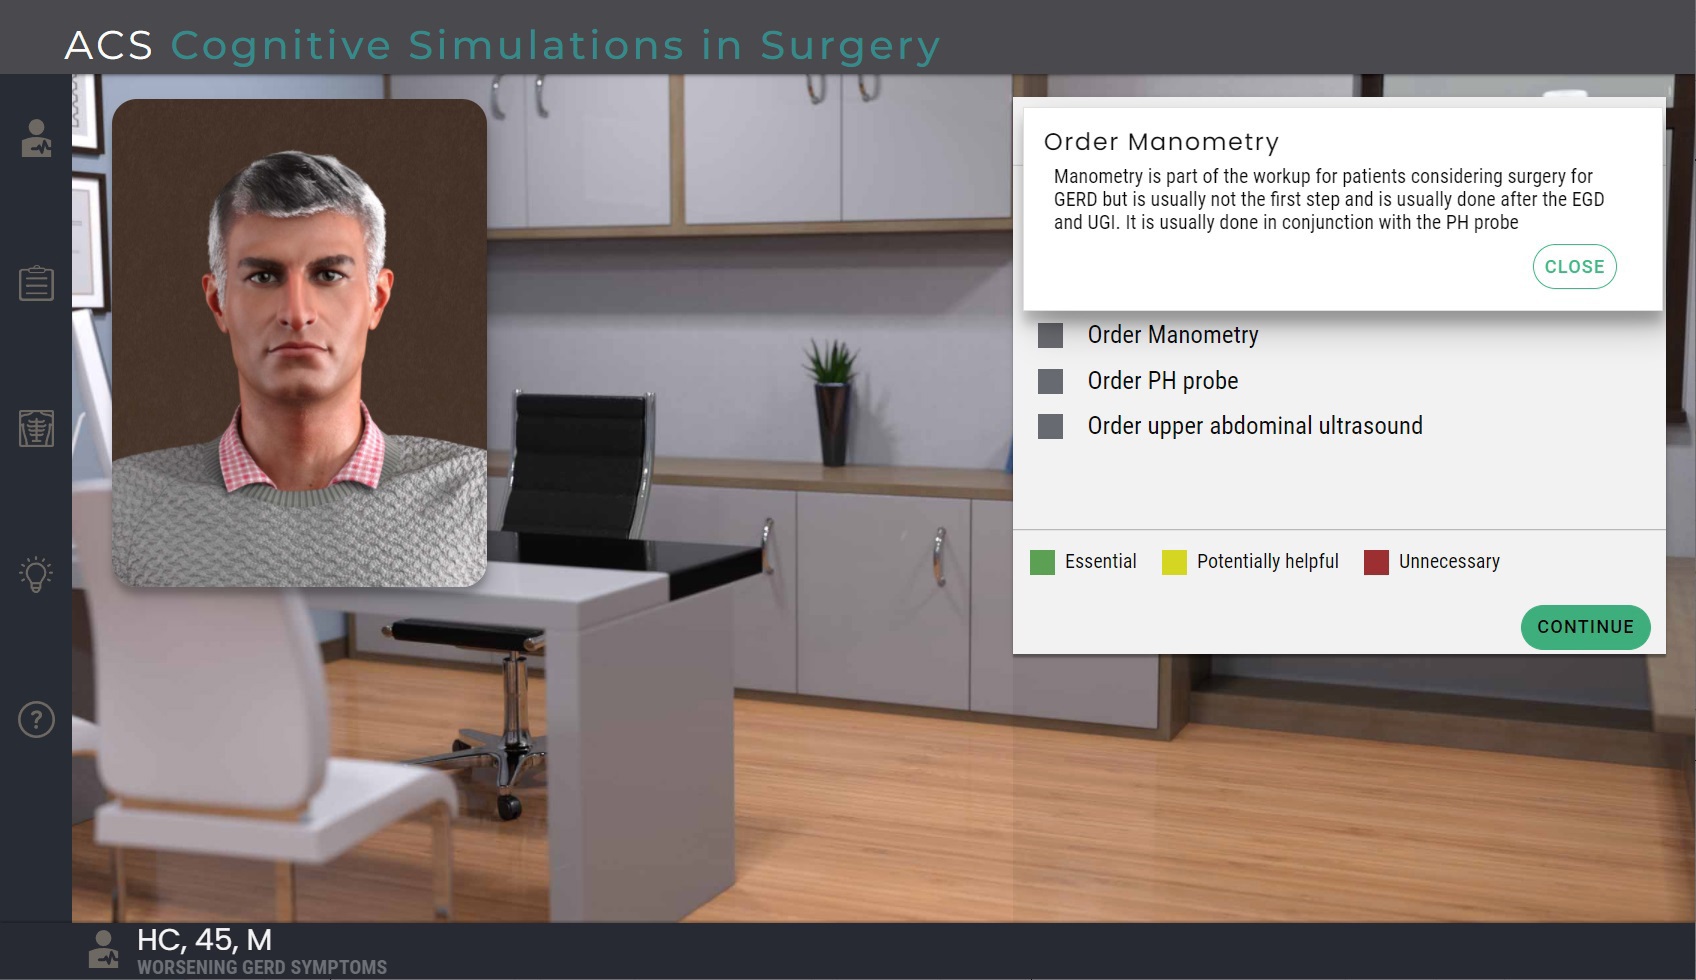 ACS Cognitive Simulations: Cases Essential to Surgical Practice